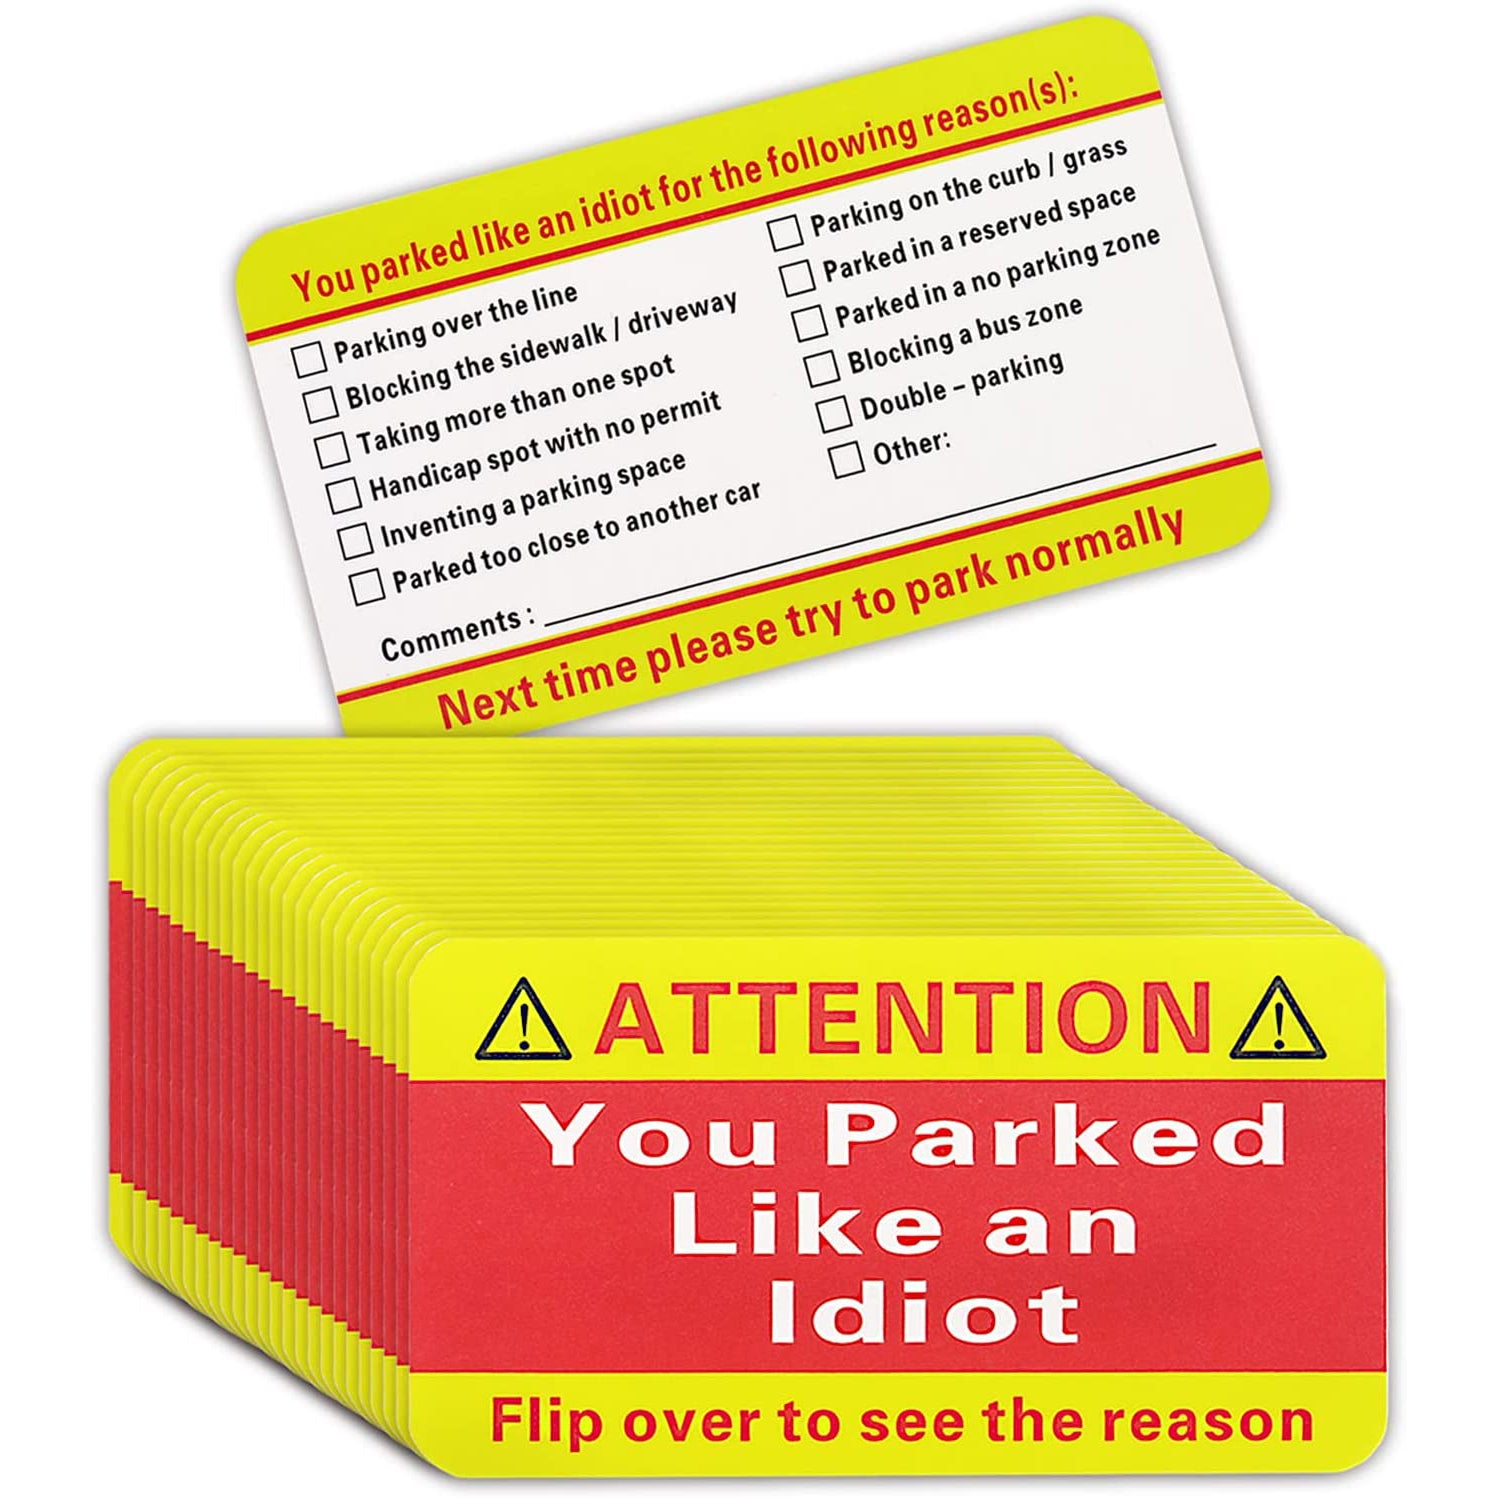 Gialer 100pack You Parked Like an Idiot Cards Bad Parking Cards 3.5"x2" Multi Reasons Violation